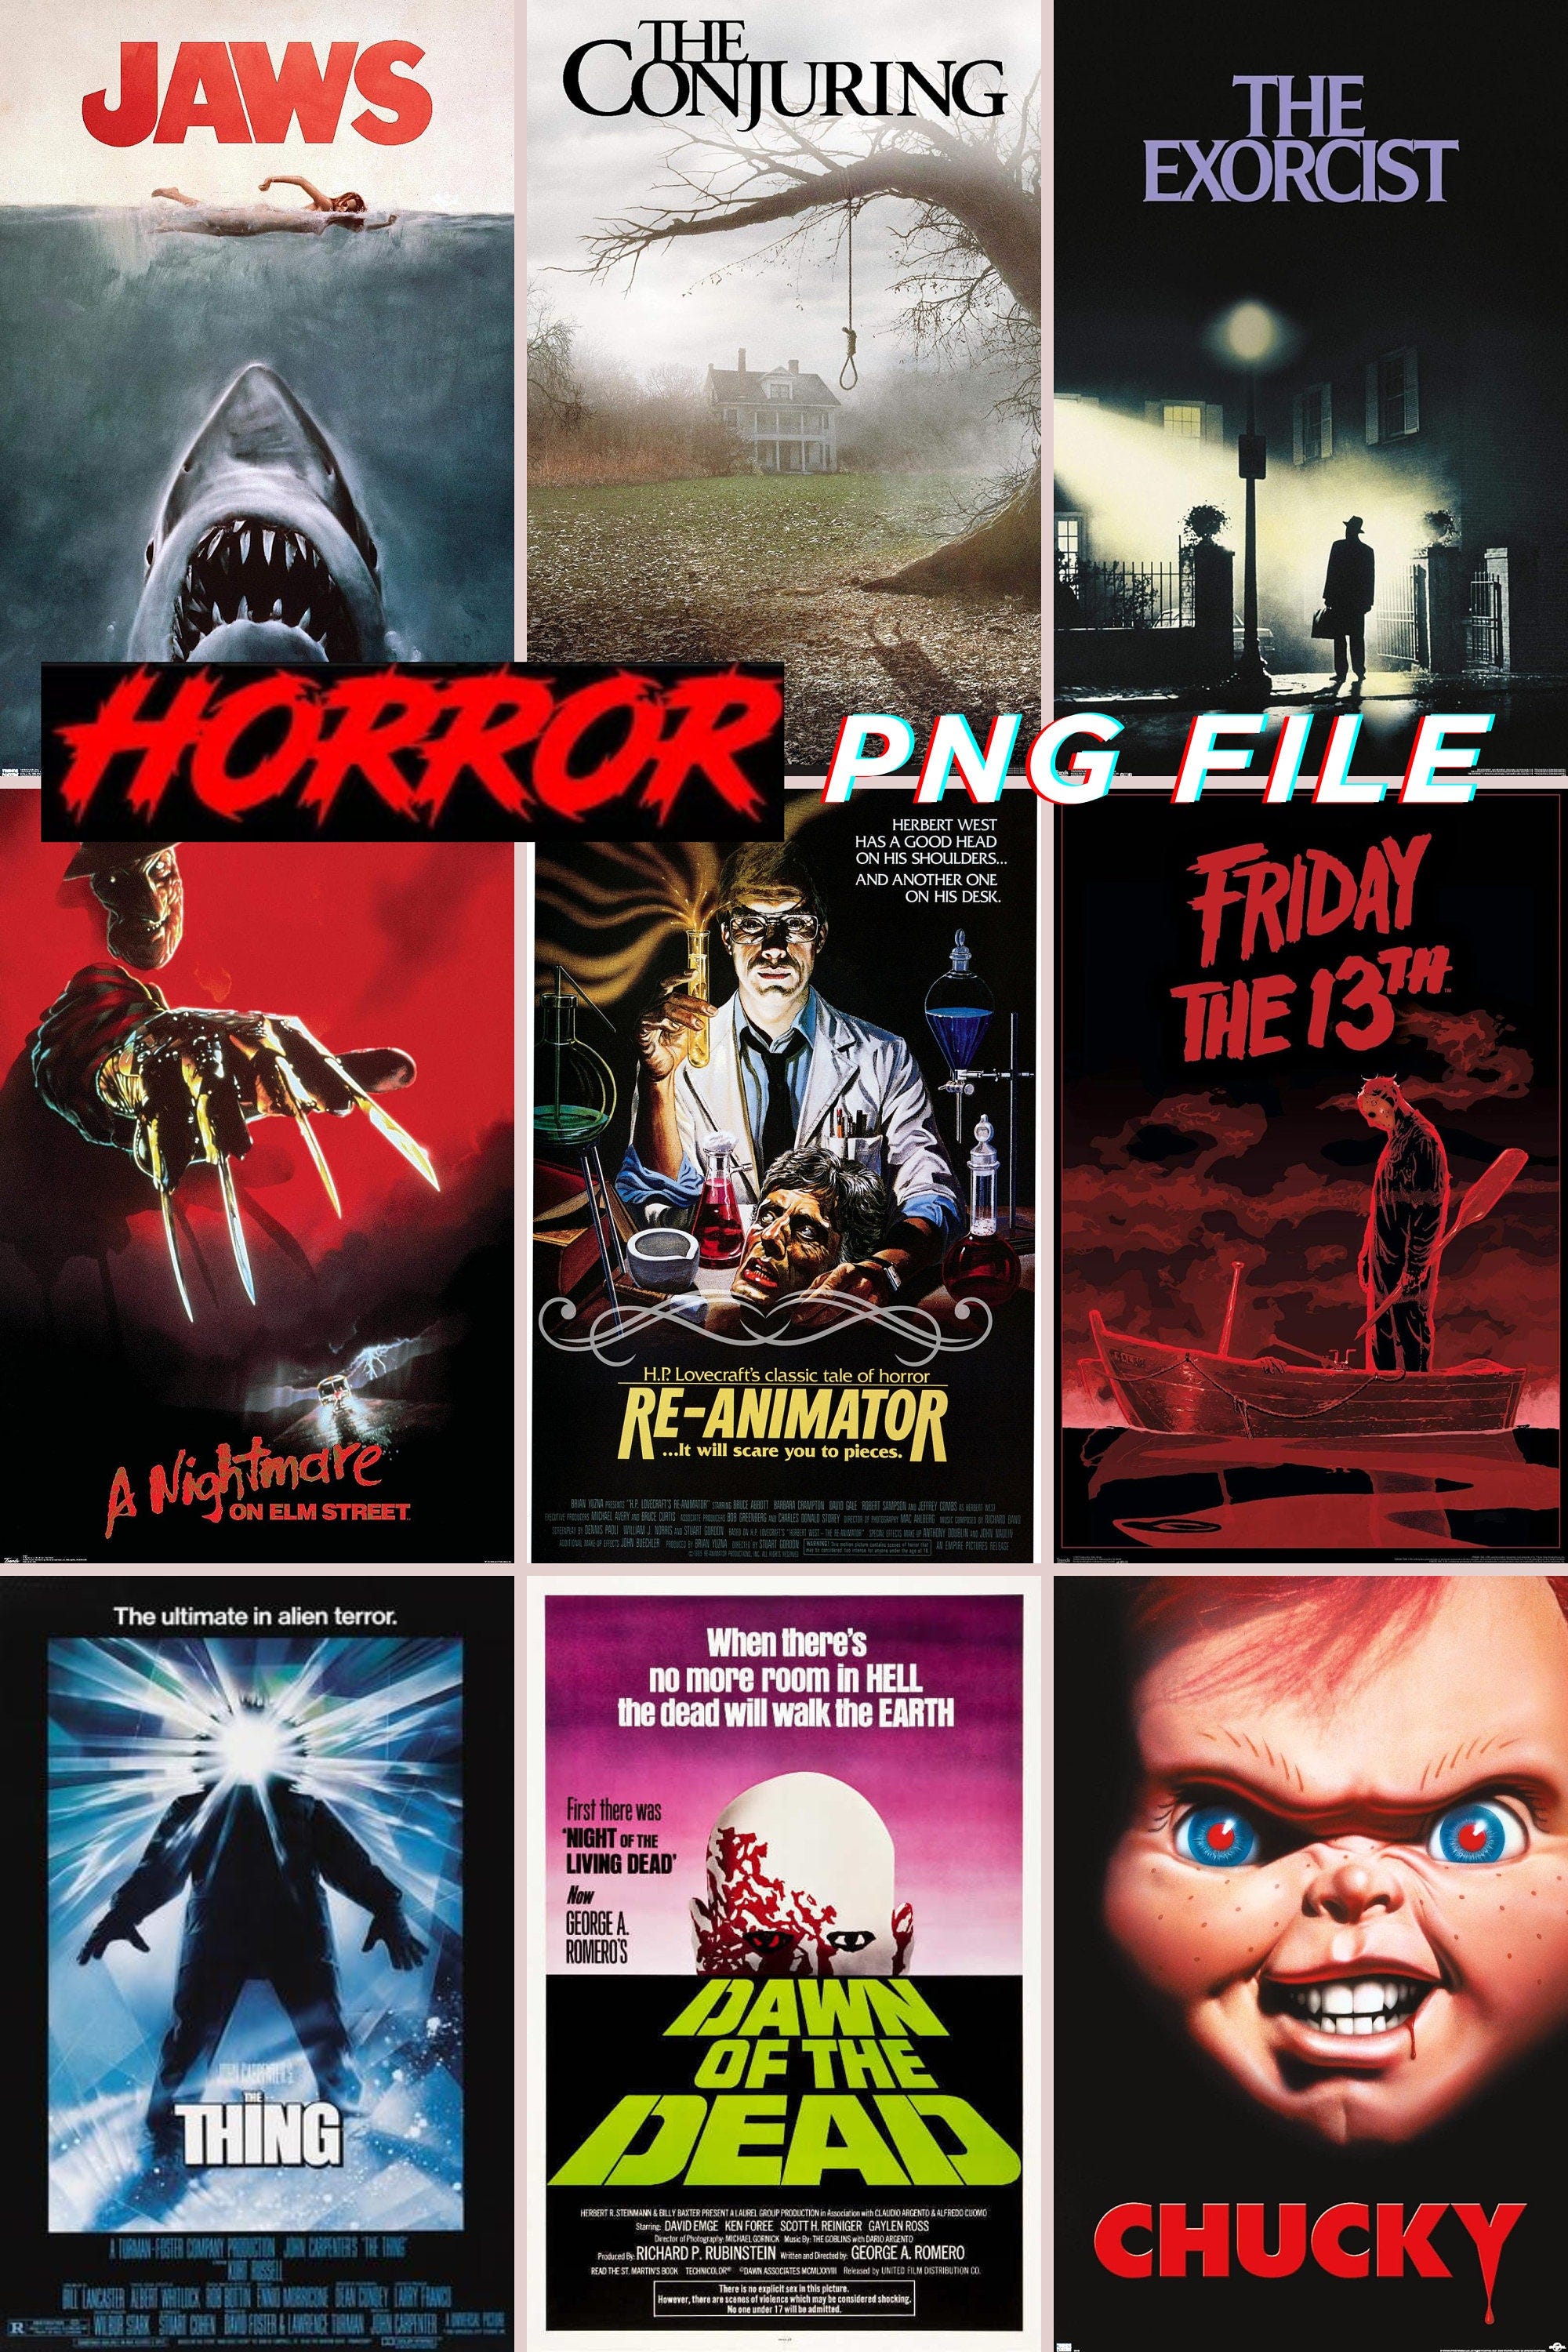 25+ Horror Png Bundle, On Sale Buy Now, Horror Movie Cover Bundle, Best Quality for Large POD Products, like rugs, shower curtains etc